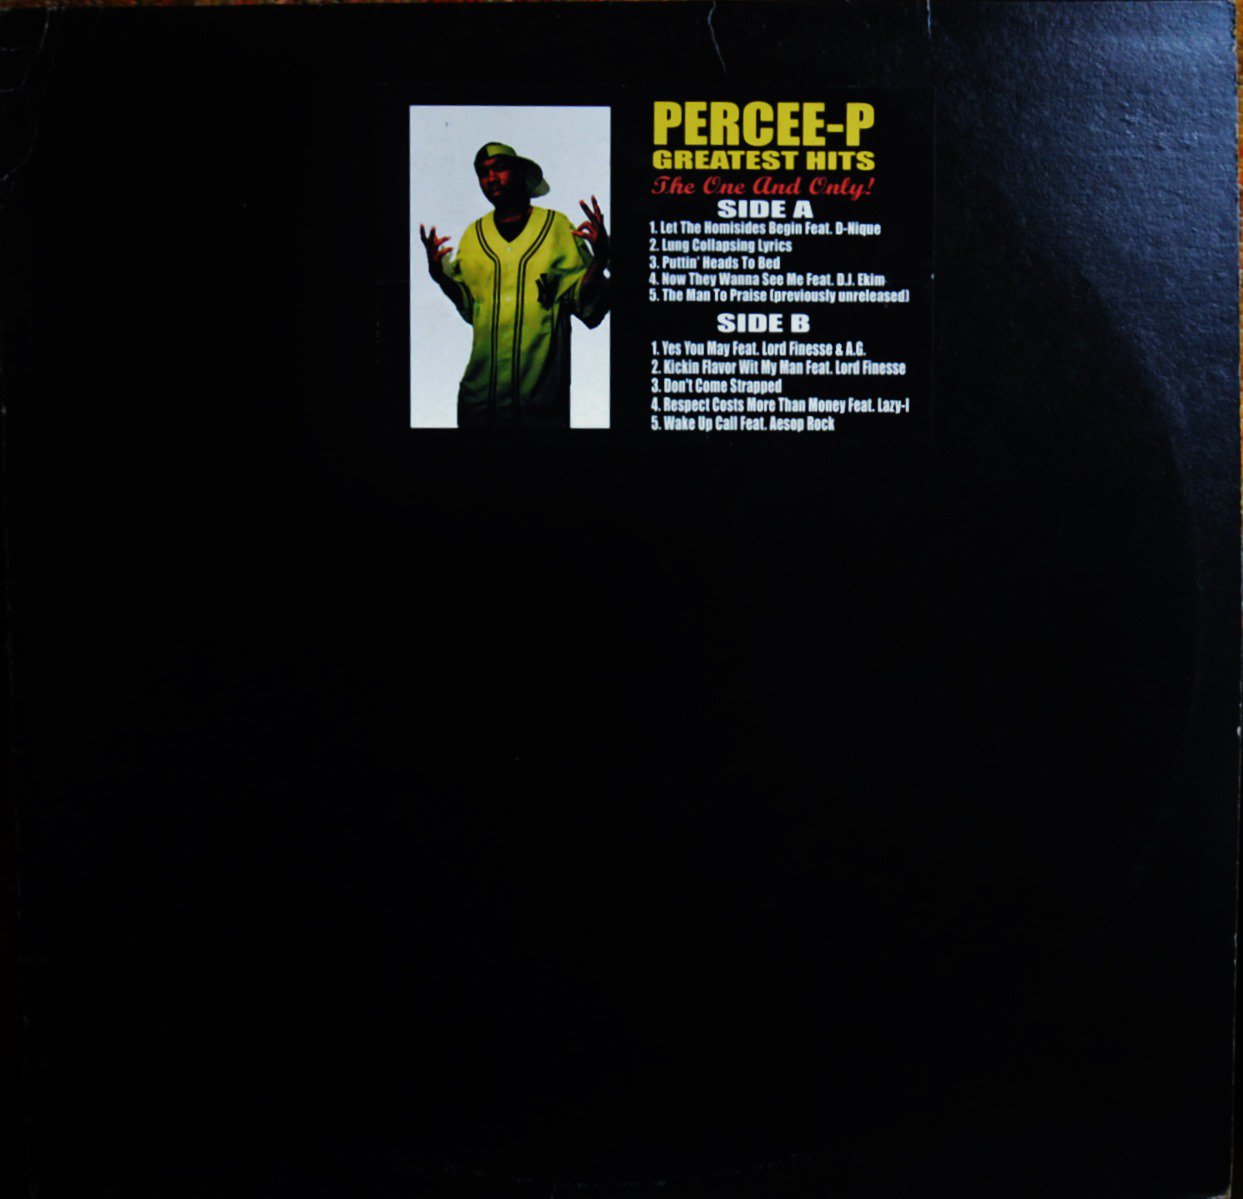 Percee P - The One And Only (シールド)